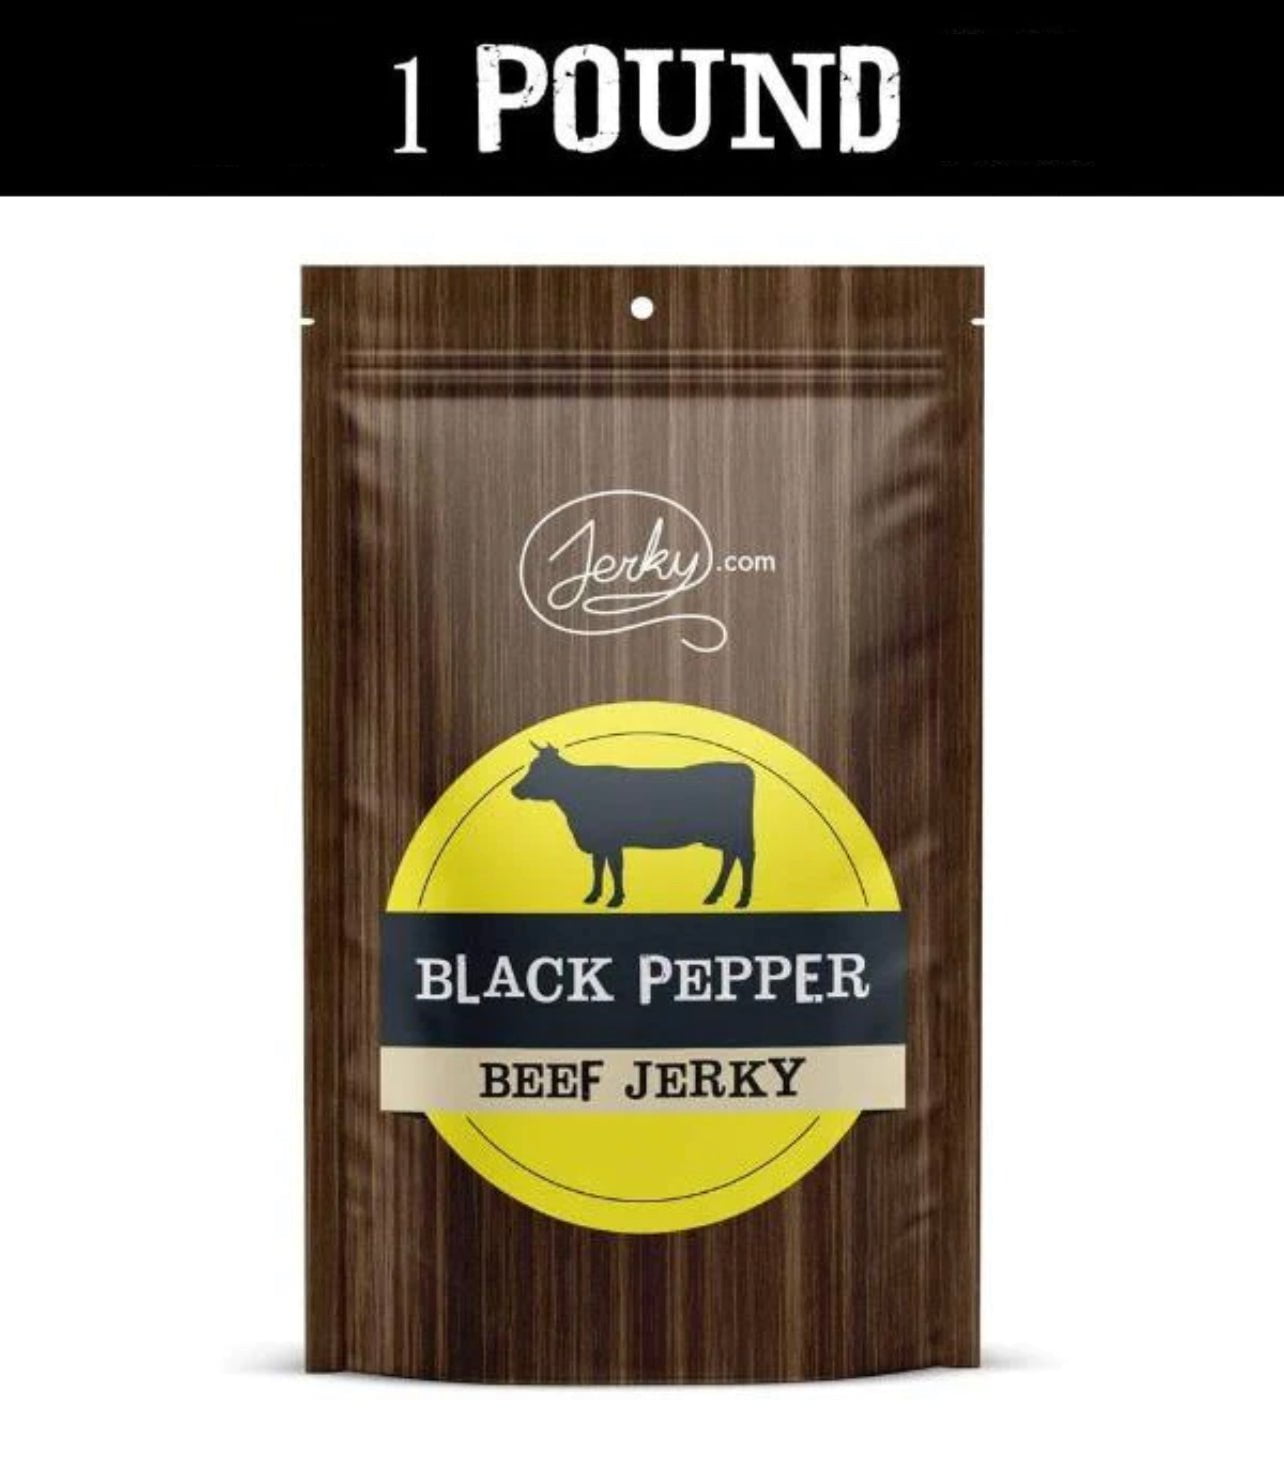 All-Natural Beef Jerky - Black Pepper - 1 Pound by Jerky.com